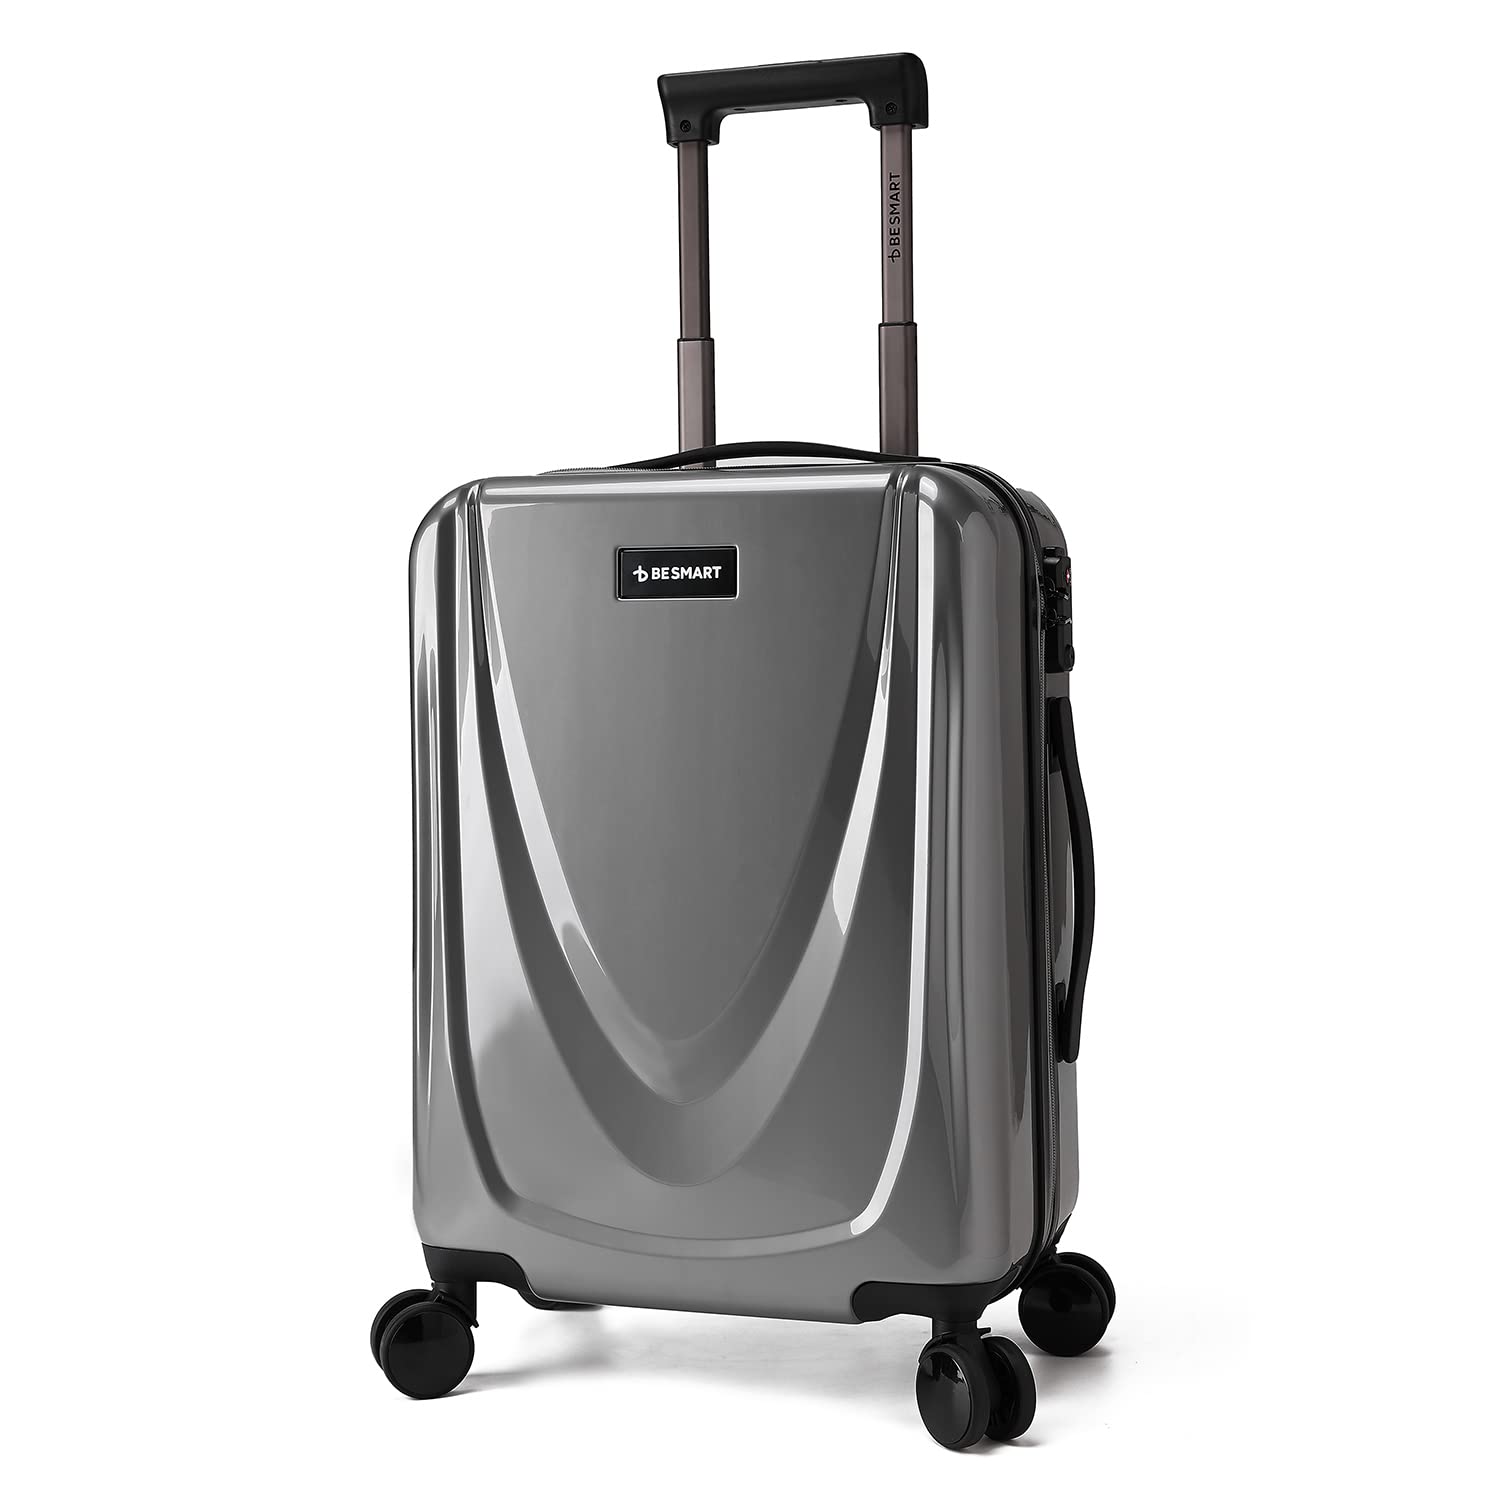 BE SMART 20in(for boarding) Luggage with Spinner Silent Wheel, carry on Trolley case Built-In Pc+ABS & TSA lock, Small Suitcase